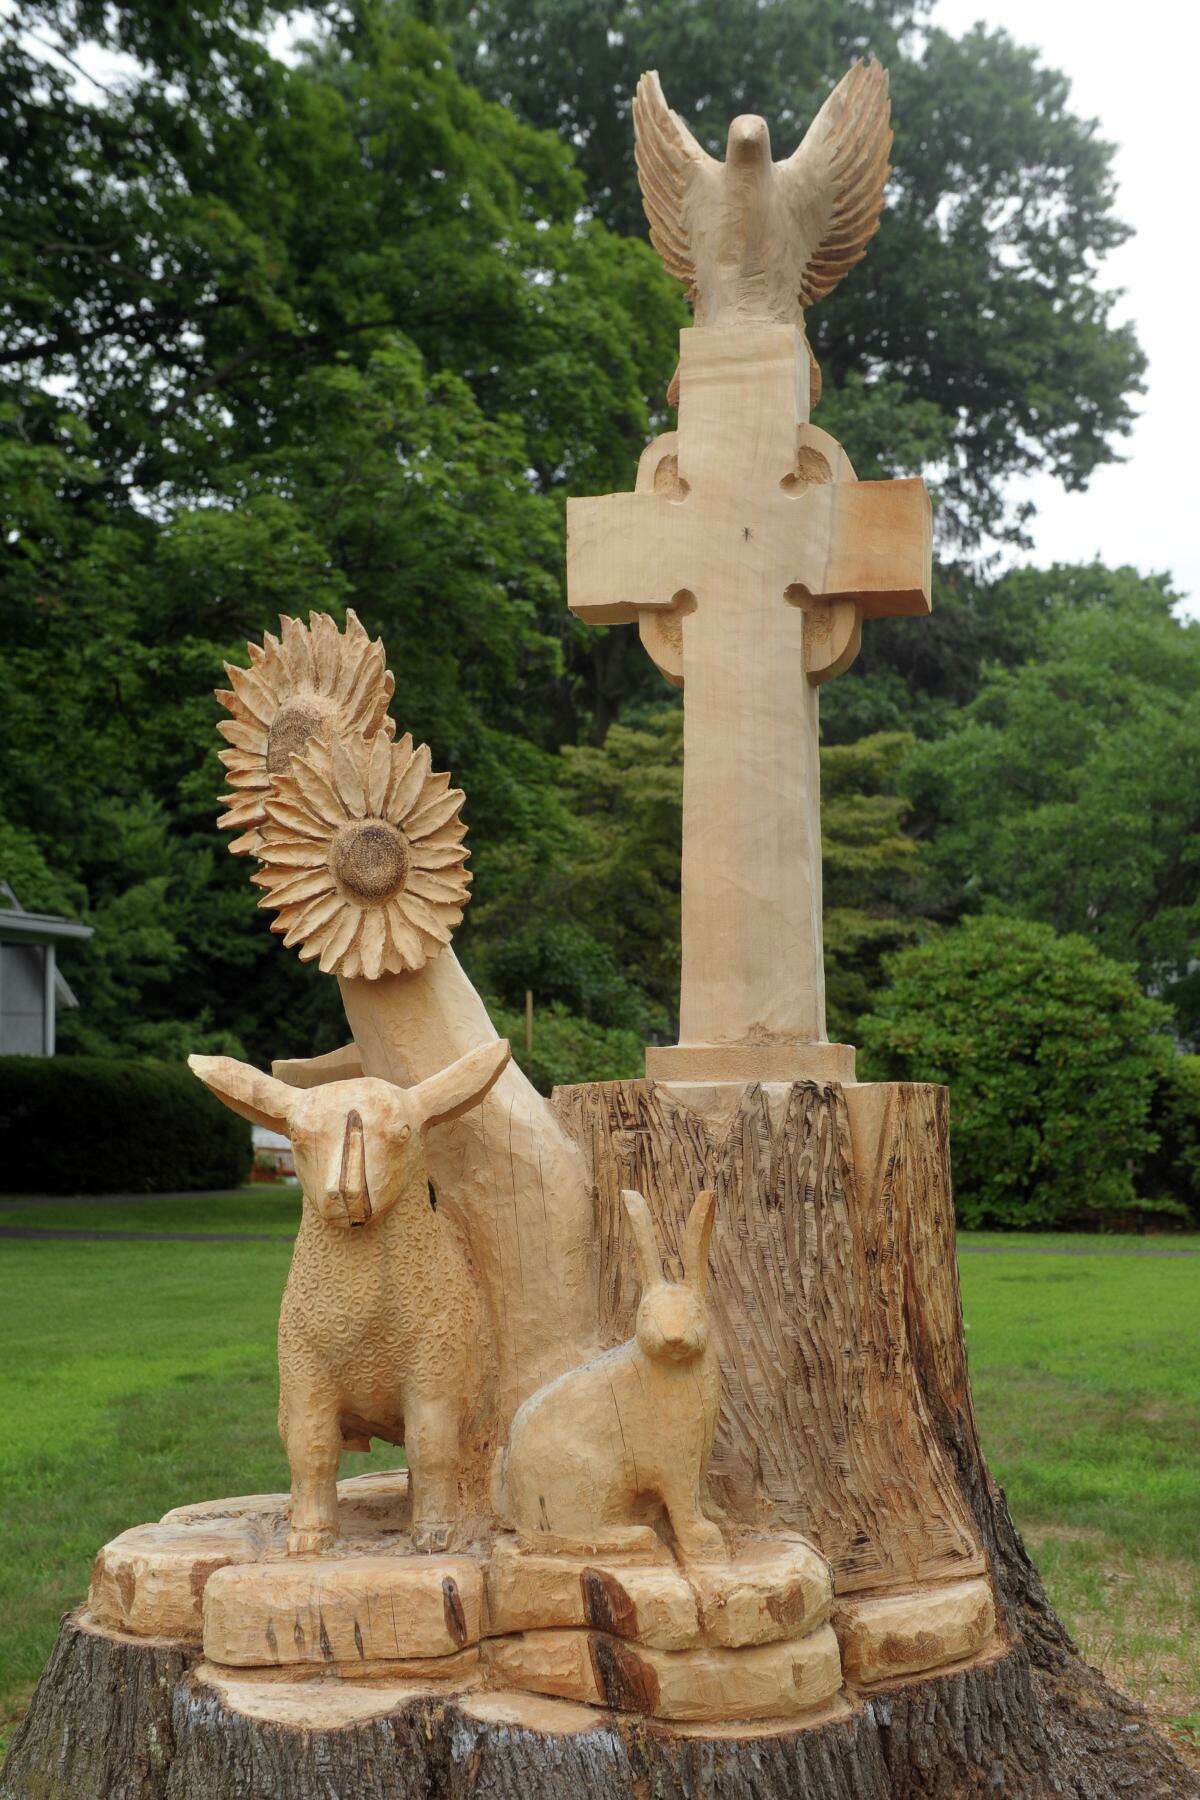 The new sculpture carved out of the truck of an old Maple tree in front Trinity Episcopal Church, in the Nichols neighborhood of Trumbull, Conn. July 24, 2020.